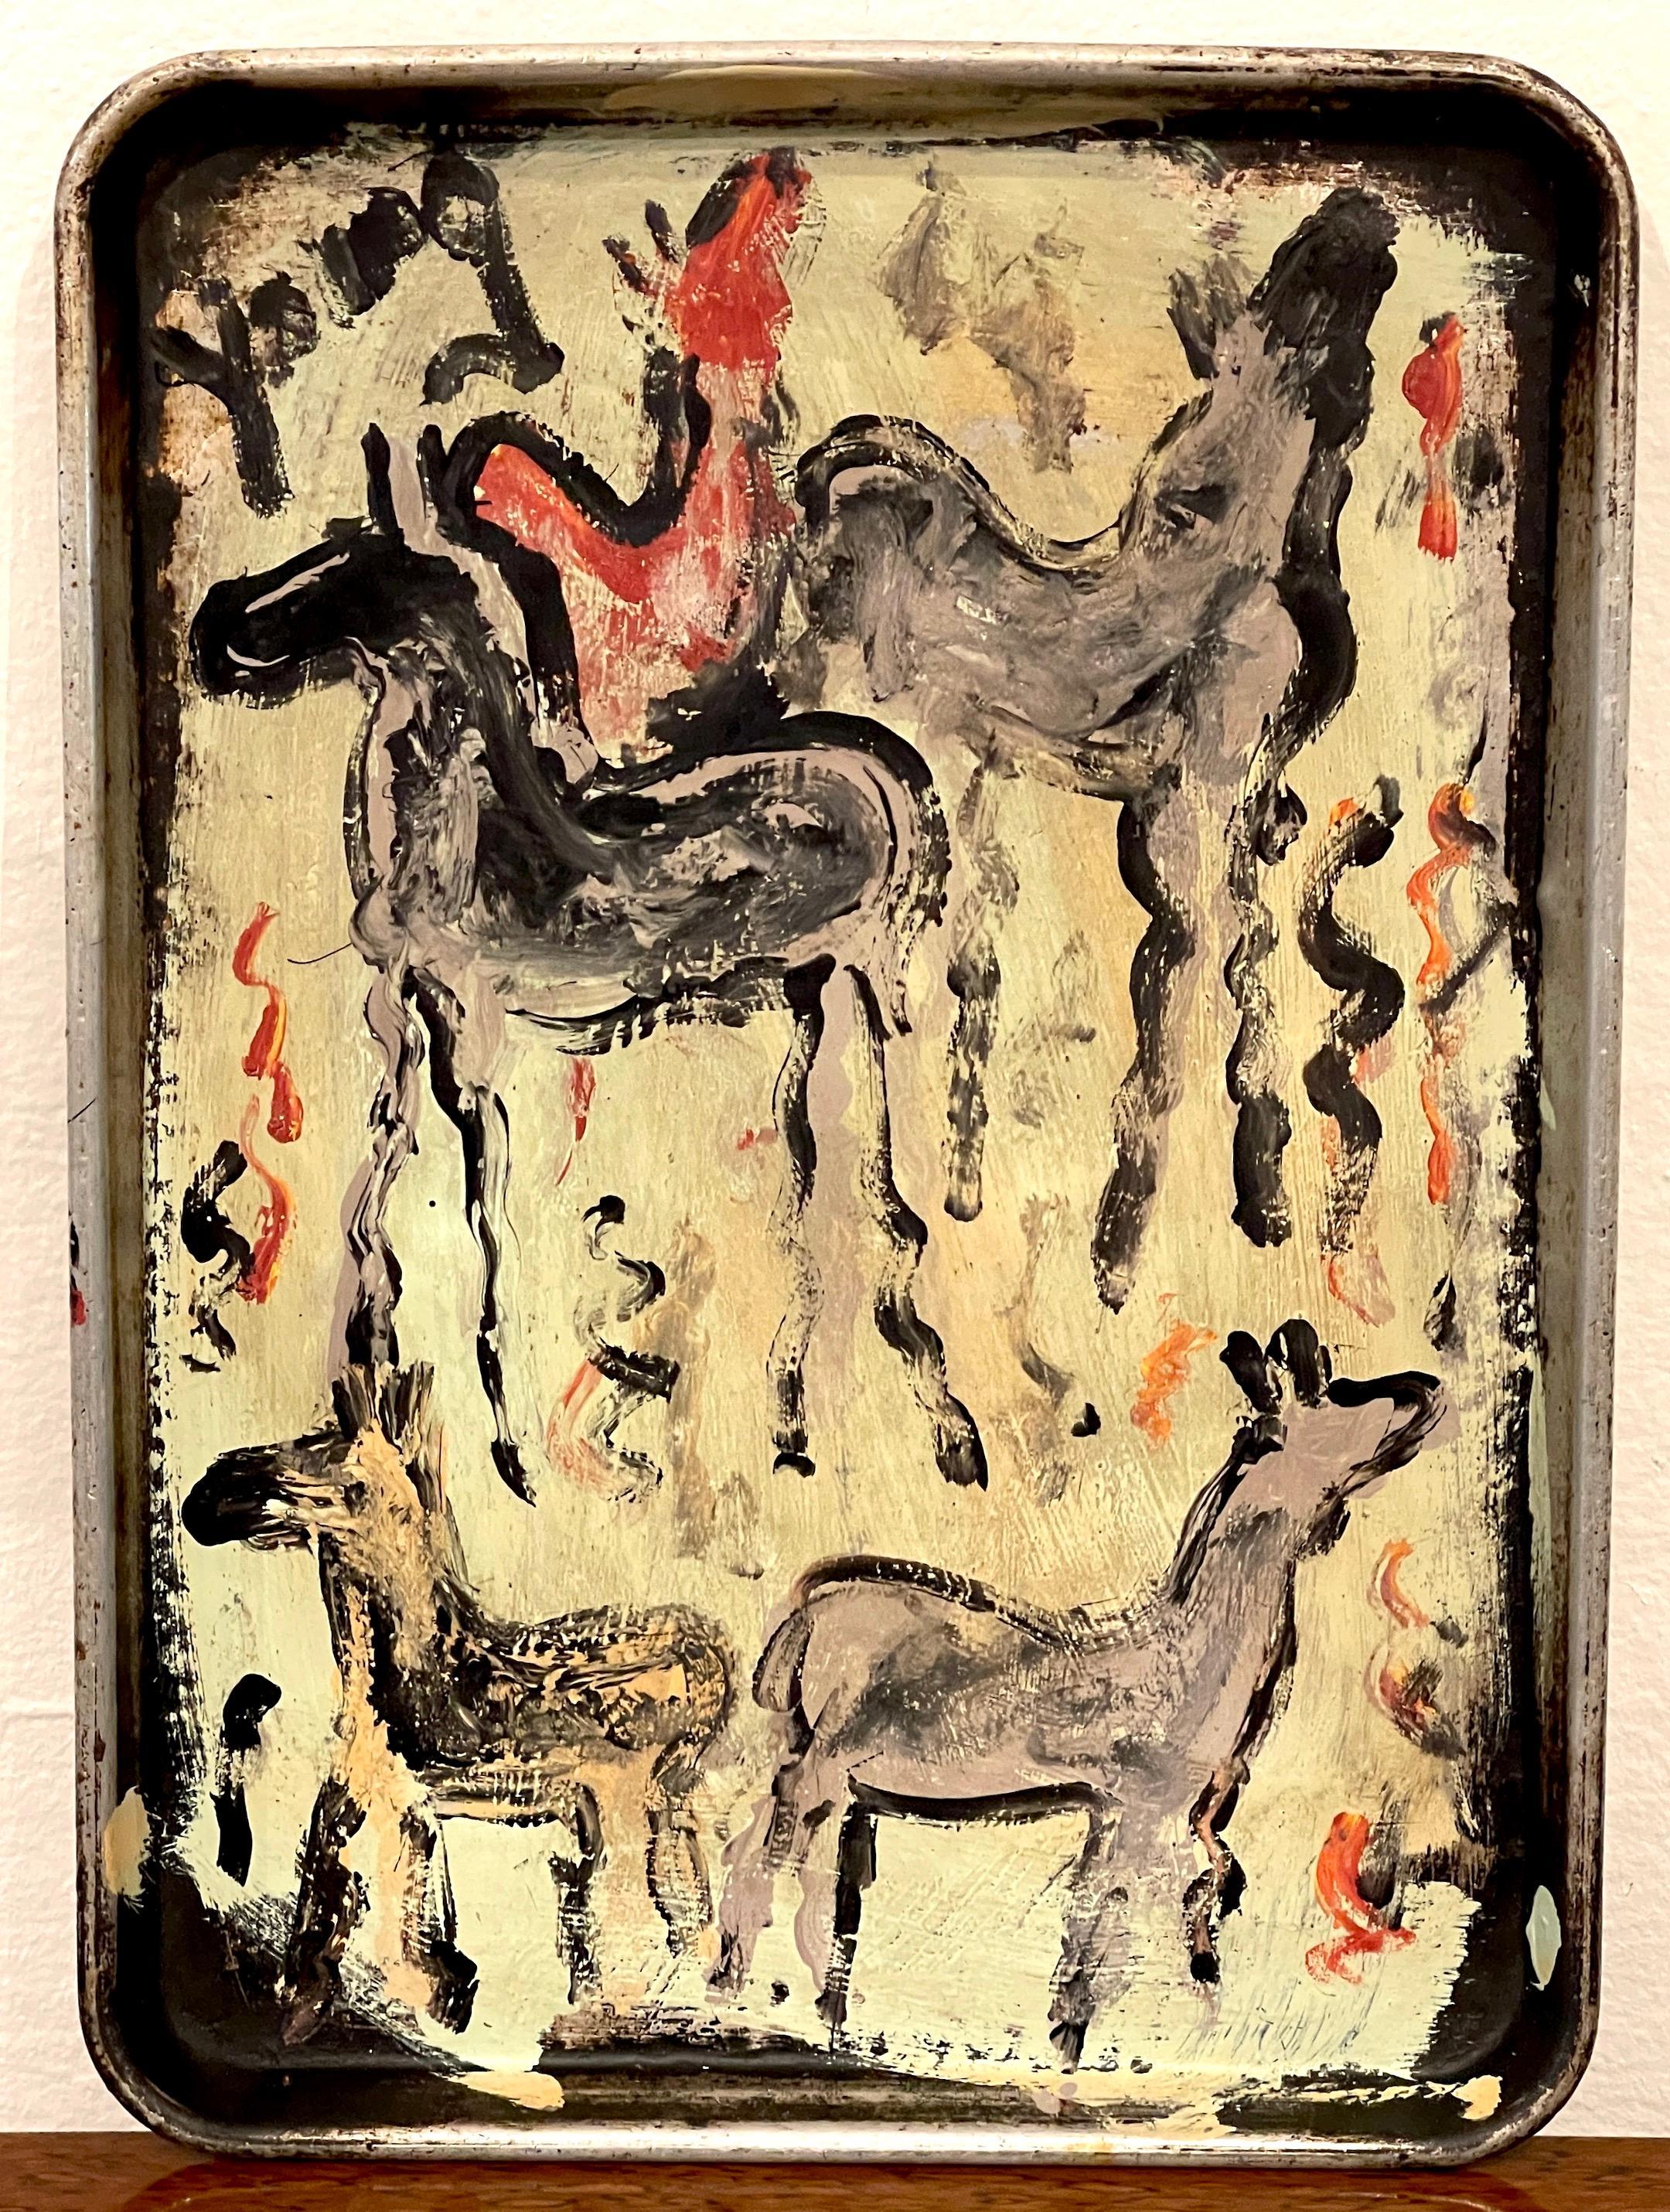 'Herd of Freedom Horses' by Purvis Young (1989–1999)
USA, circa 1980s

A progressive work, painted on a found metal tray, of five horses in landscape. signed 'Young' upper right corner. In untouched, well-cared-for vintage condition, ready to